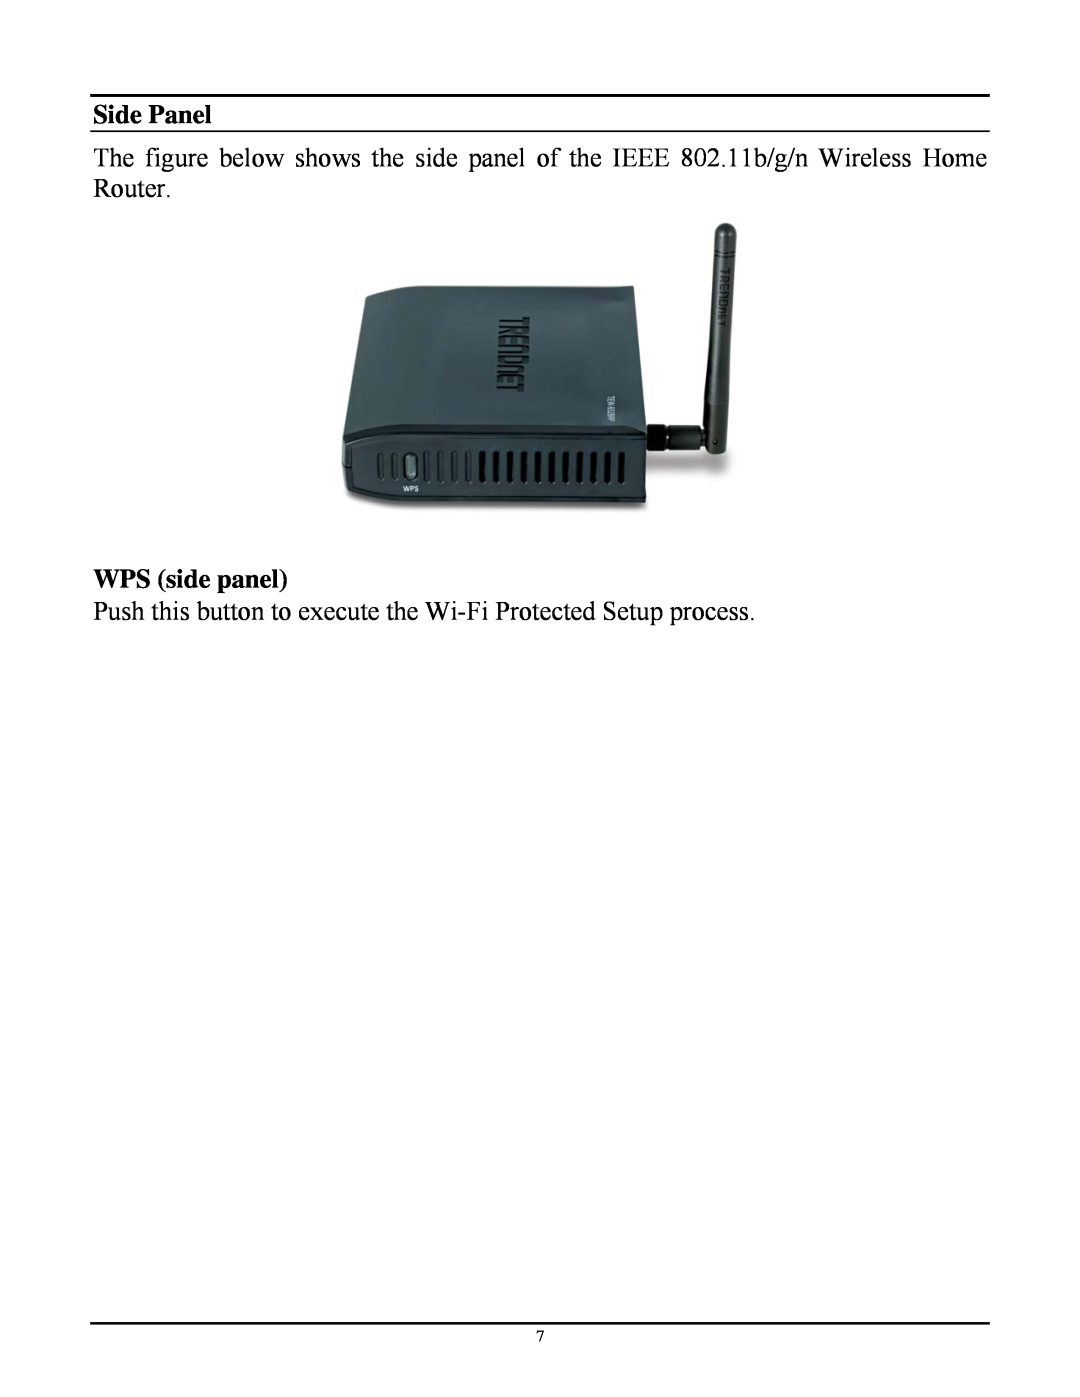 TRENDnet TEW-652BRP manual Side Panel, WPS side panel, Push this button to execute the Wi-Fi Protected Setup process 